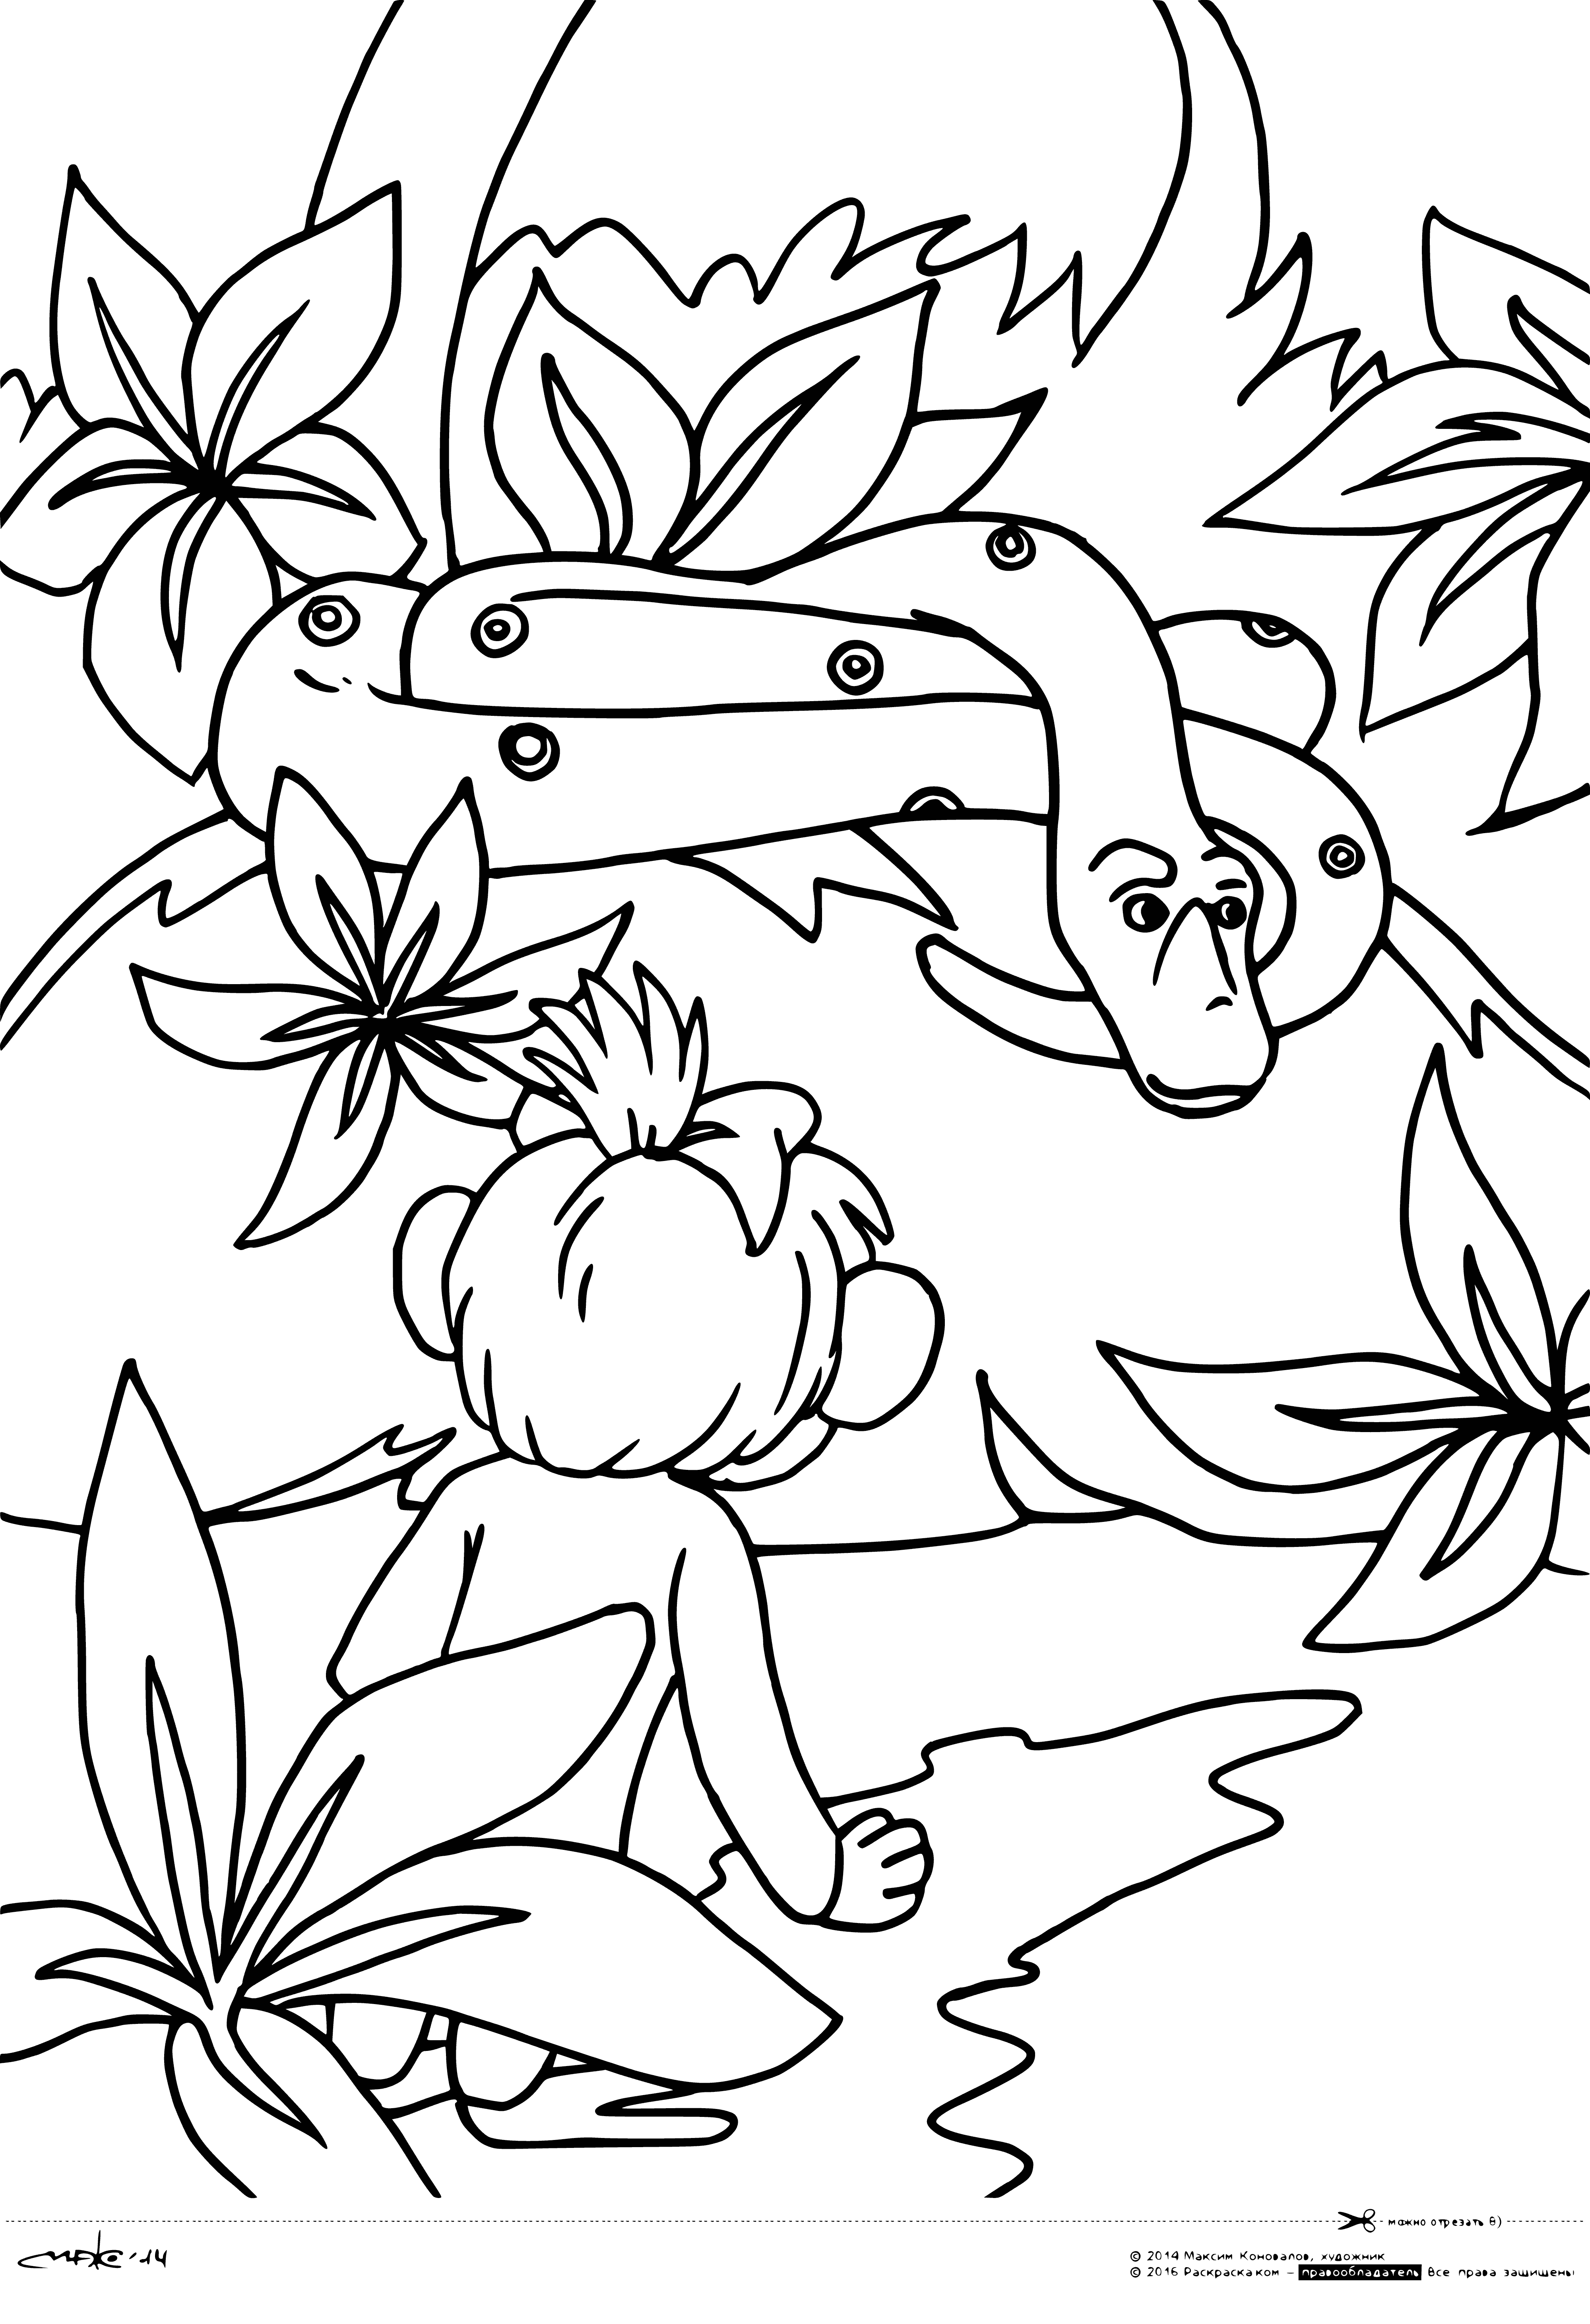 coloring page: 38 parrots in coloring page - different colors & patterns, some sticking to branches, others flying.